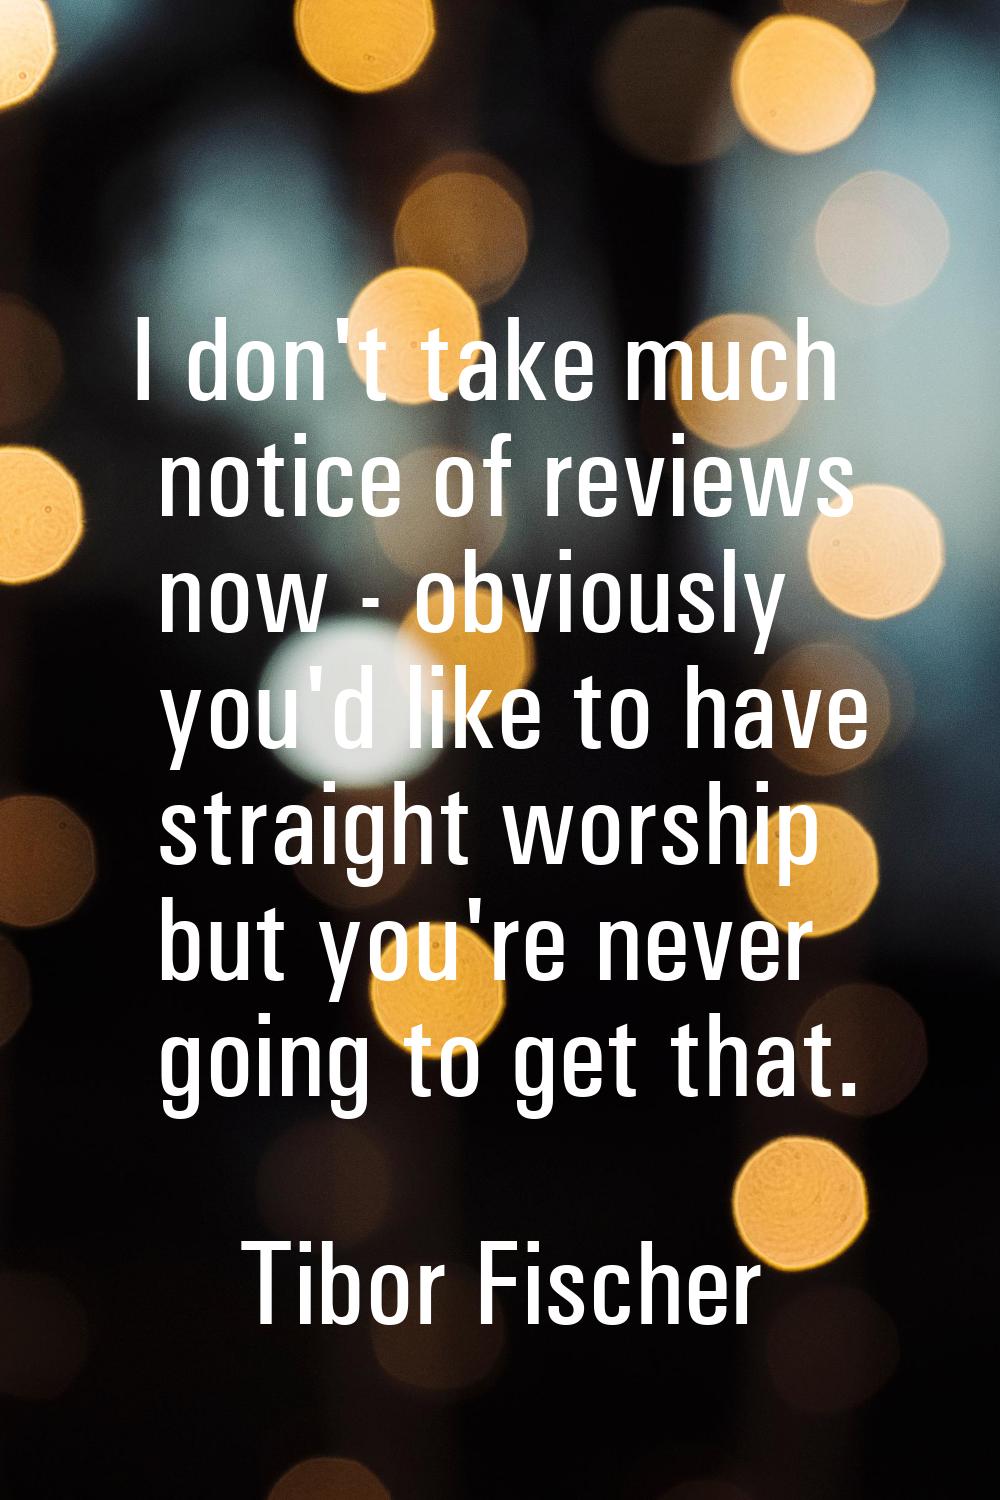 I don't take much notice of reviews now - obviously you'd like to have straight worship but you're 